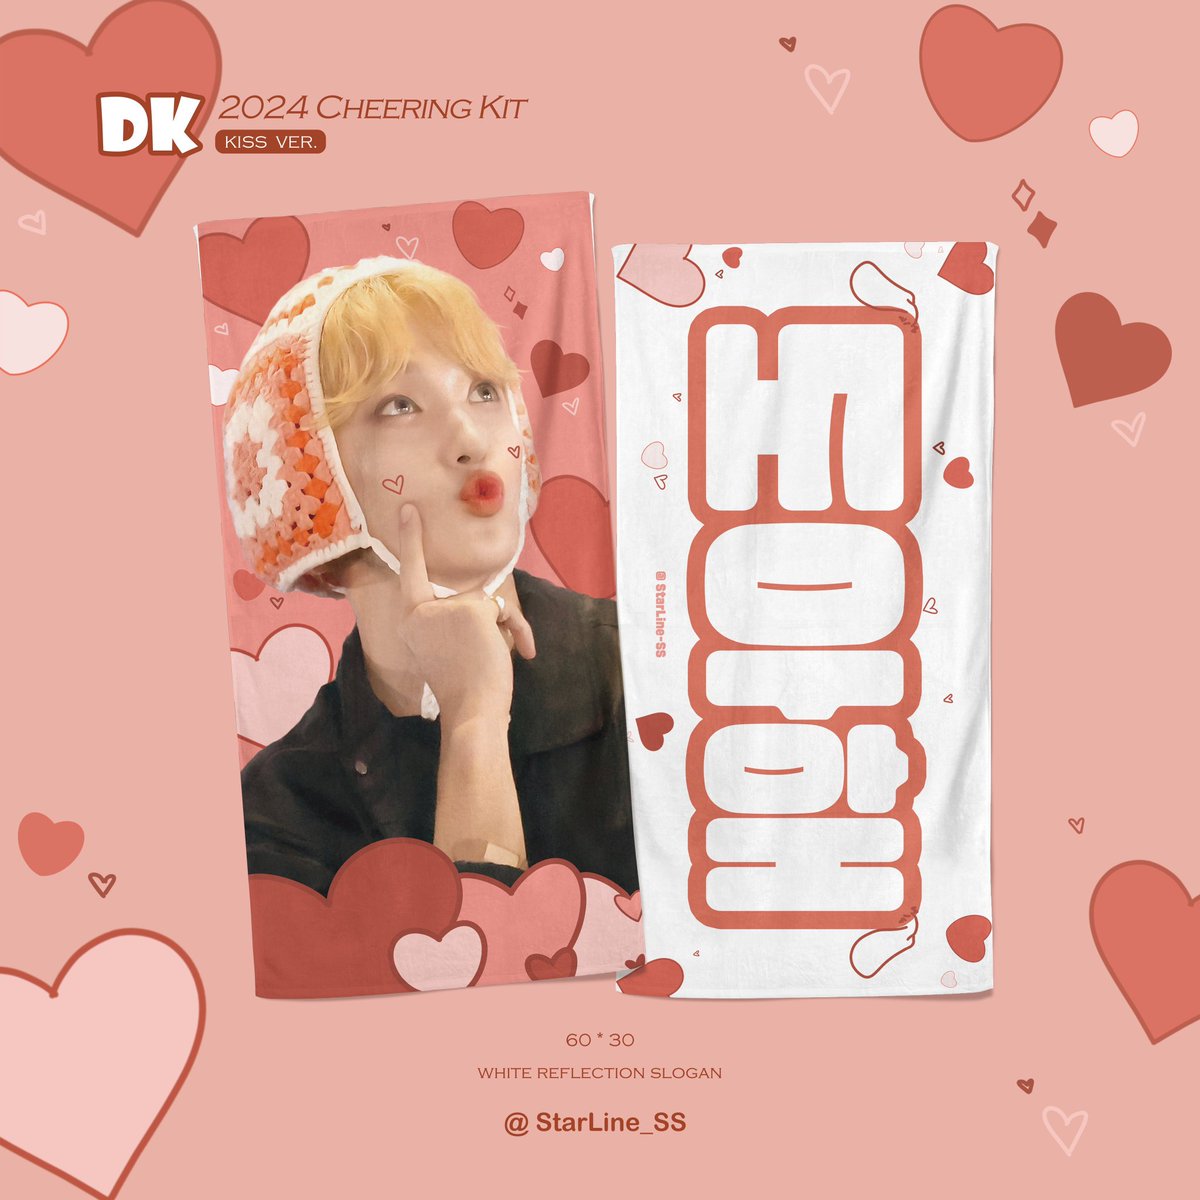 < 🇲🇨 GO > CHEERING KIT HOSHI DOKYEOM by @StarLine_SS 💰280K • DP 150k order form : bit.ly/handcarry-rr ✨Handcarry Follow Again To Seoul 🚫Close 21/04 🚛ETA INA 17 Mei 🍊bisa pelunasan syopi DM for more questions🫶